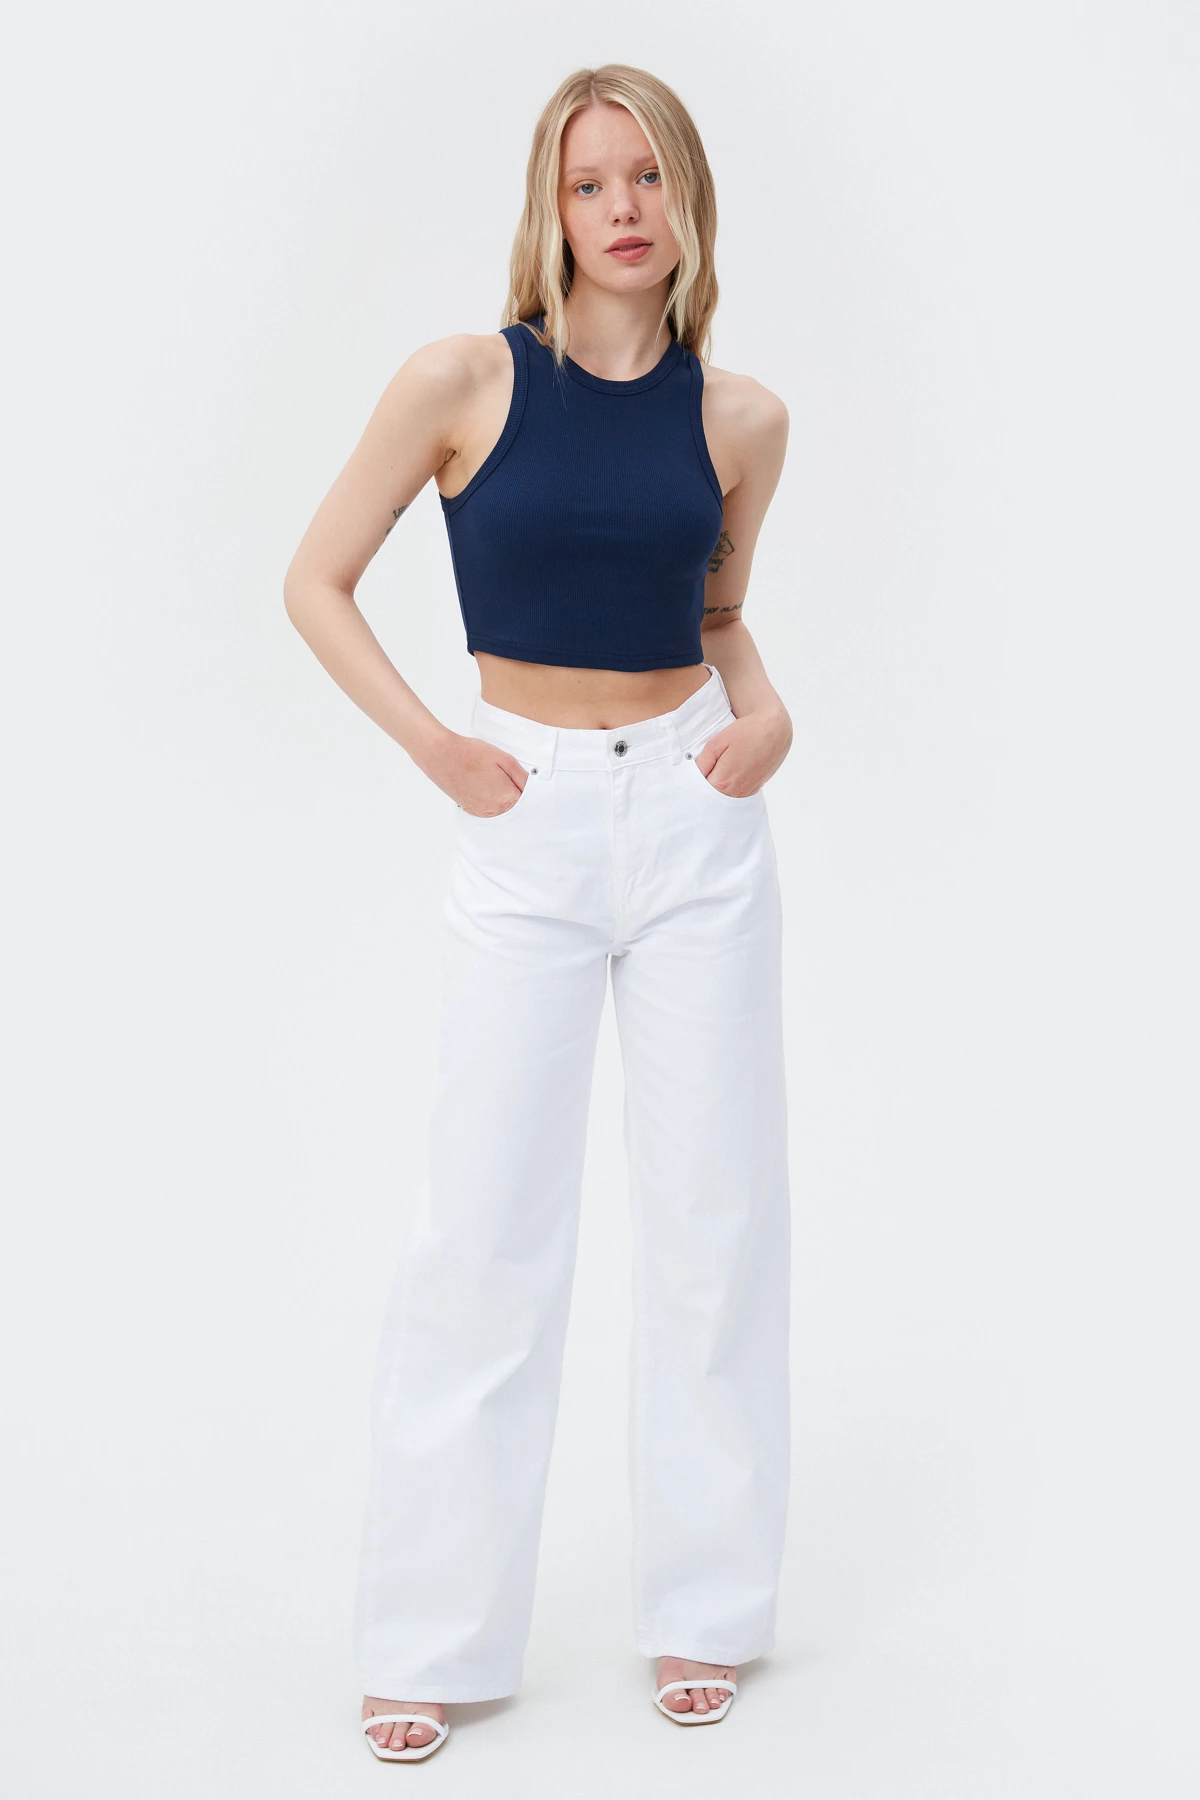 Navy blue cotton crop top with an oval neckline, photo 1